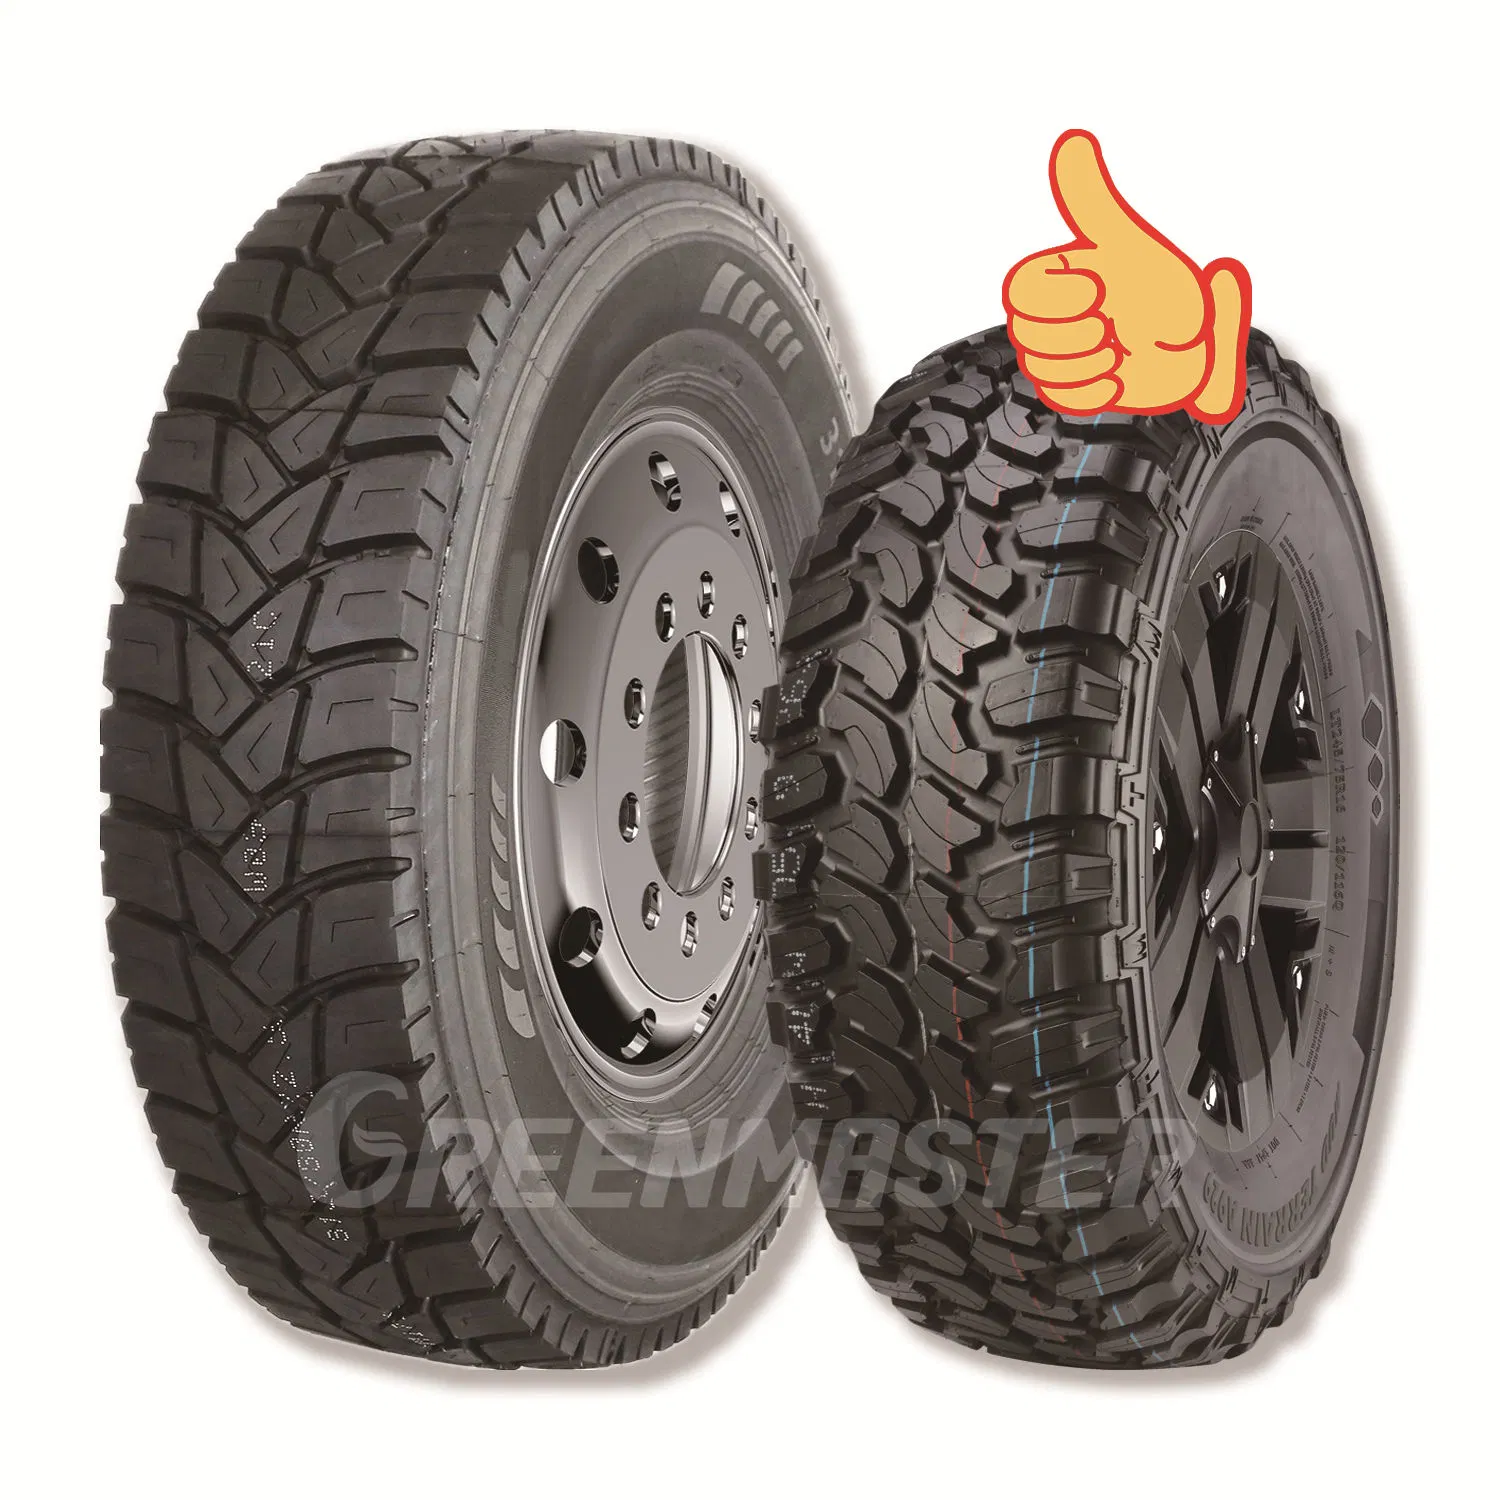 China Factory Wholesale Passenger Car PCR Tyre, 4WD Offroad SUV 4X4 at/Mt Mud Tyres, All Steel Radial Light Heavy Truck TBR Tires, Bus/Trailer OTR Wheel & Tire